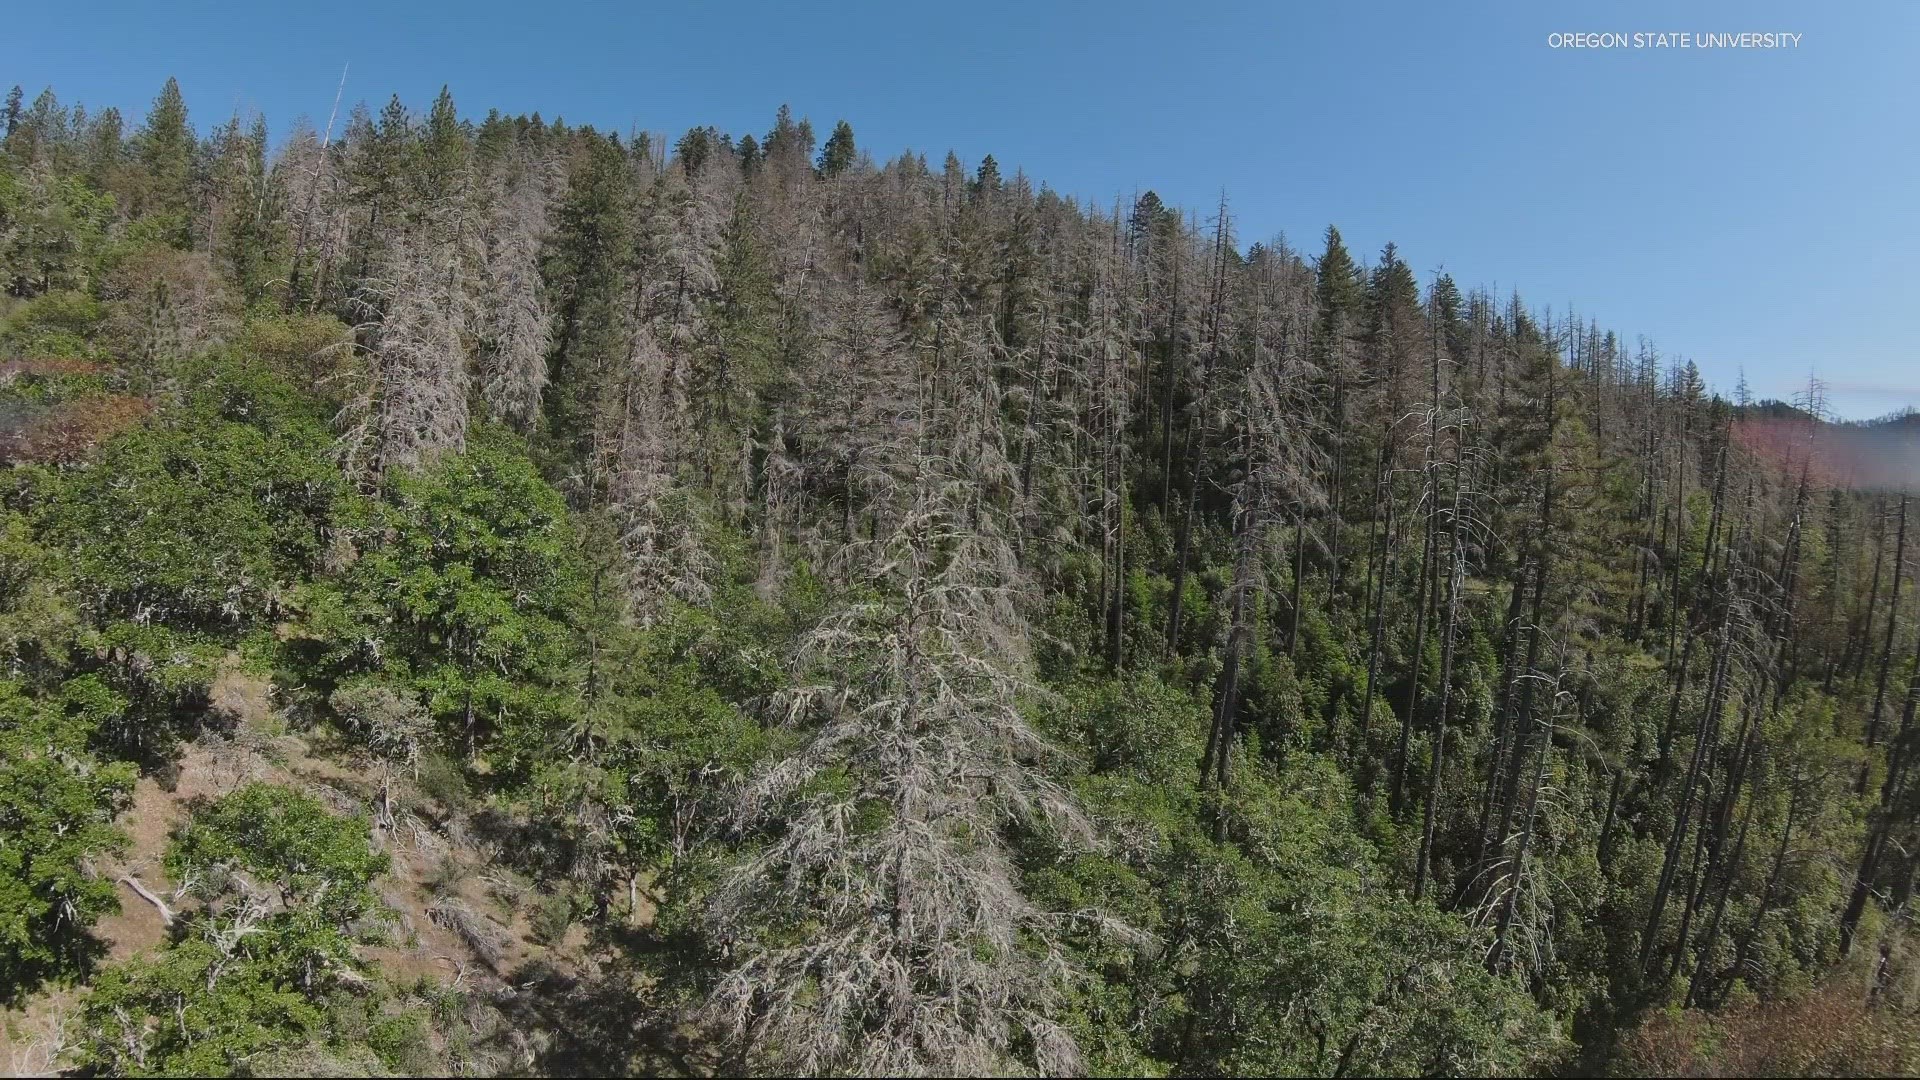 Hotter and drier conditions in recent years have impacted the population of Oregon’s state tree, with wildfires making things worse.